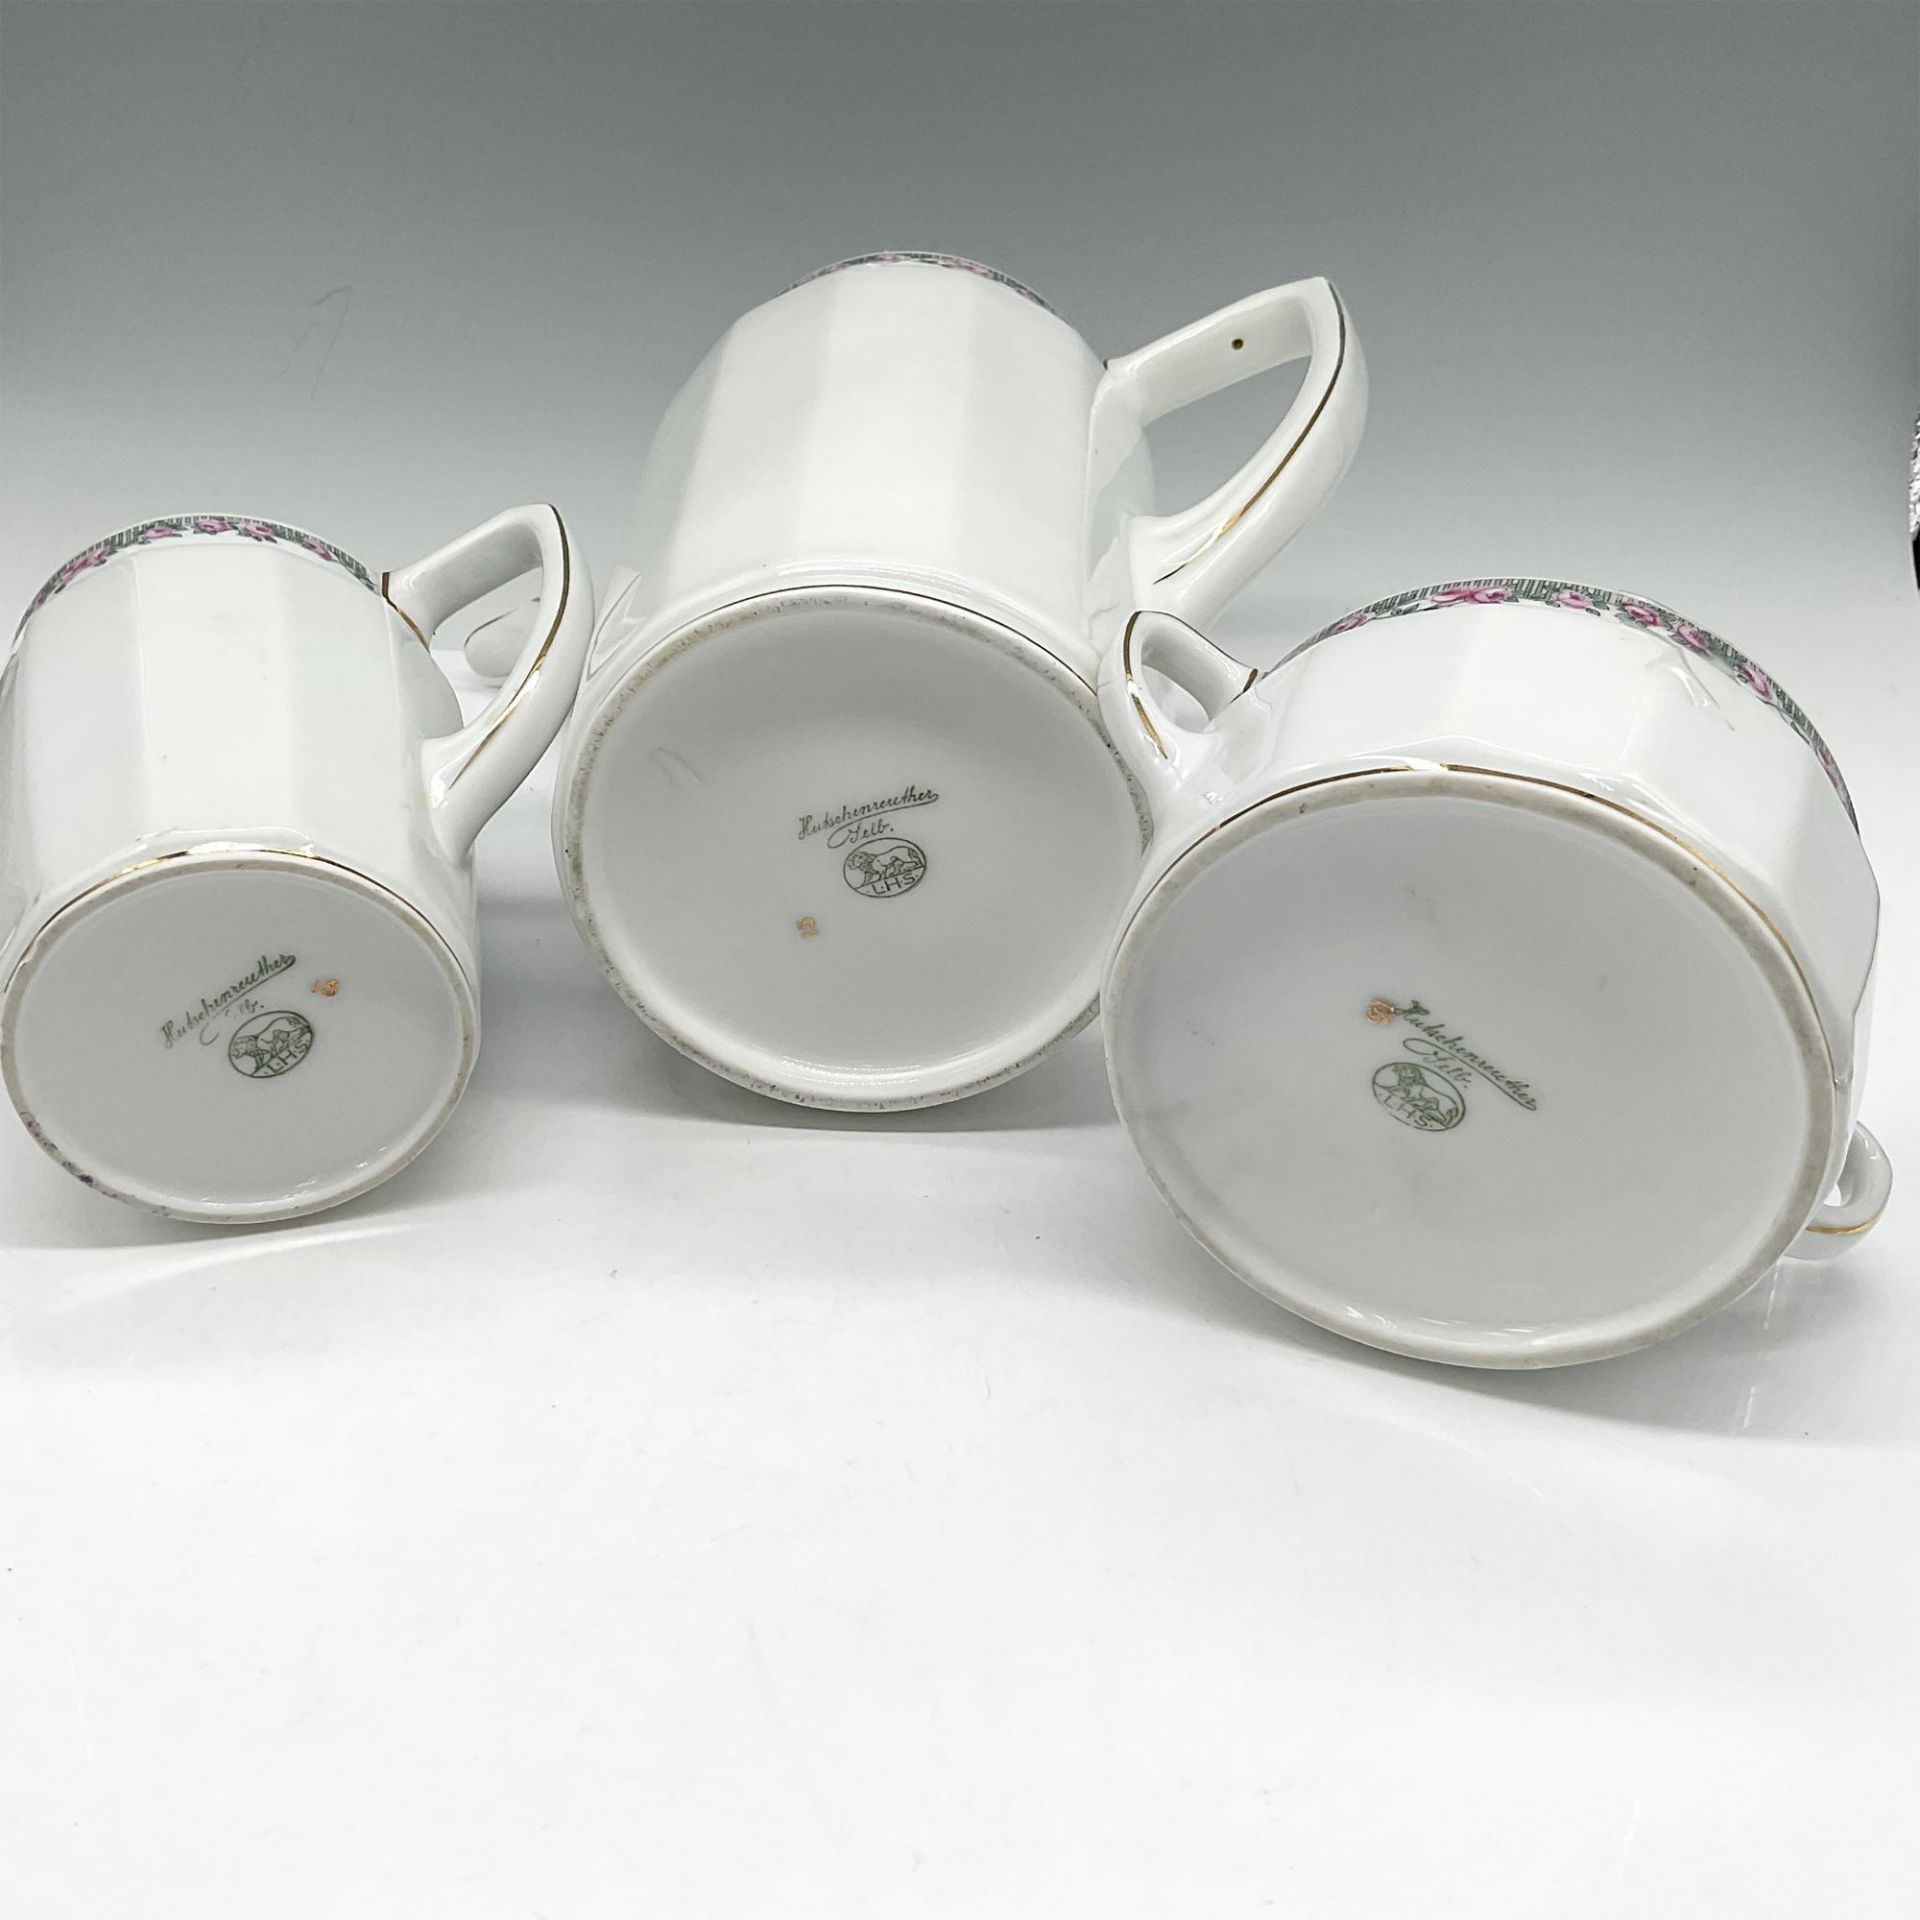 3pc Hutschenreuther Porcelain Coffee Service - Image 4 of 4